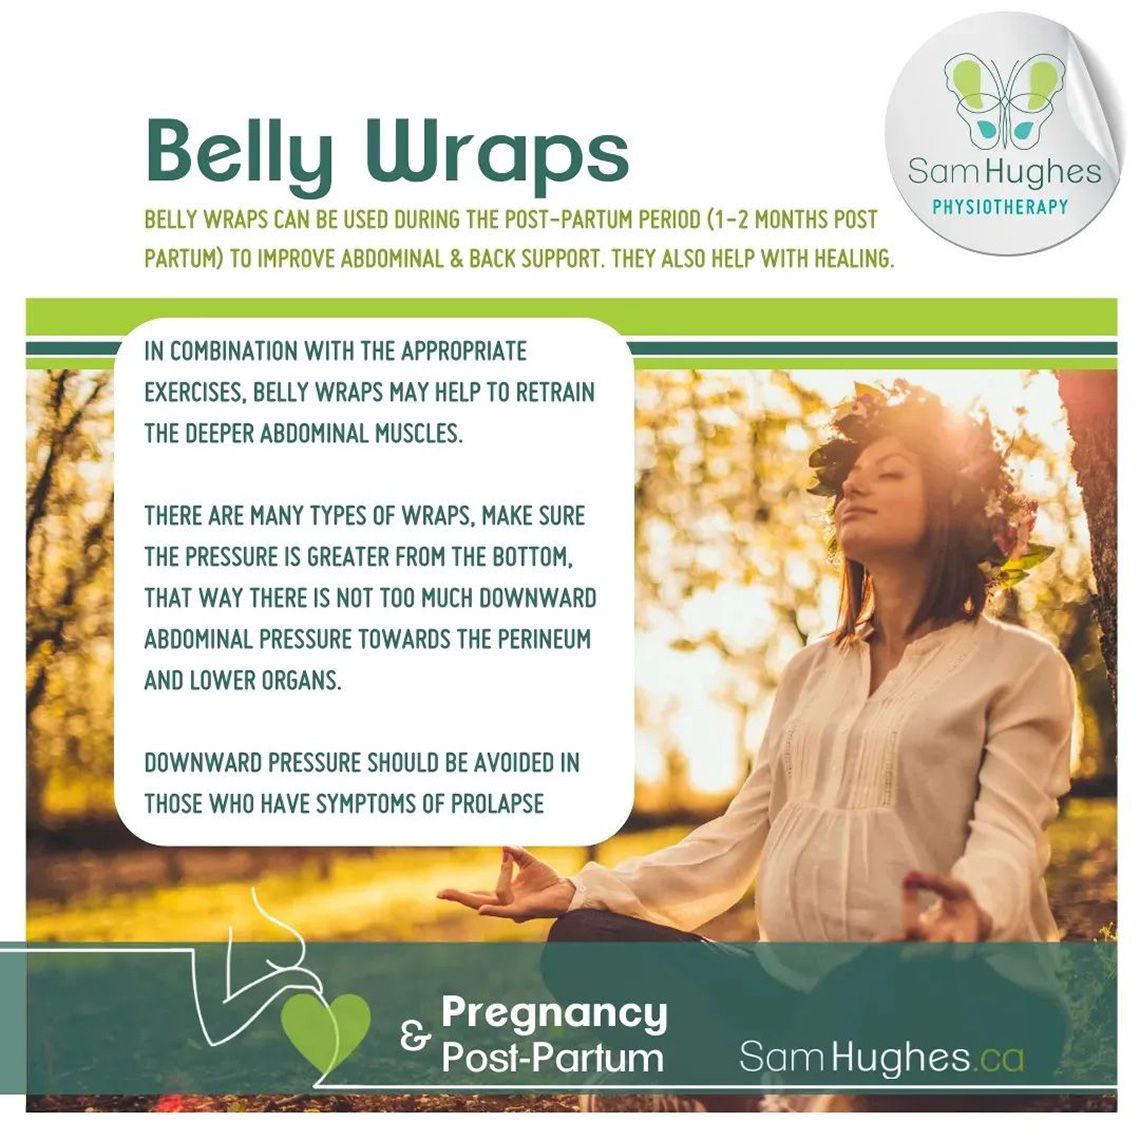 Belly Wraps during the post-partum